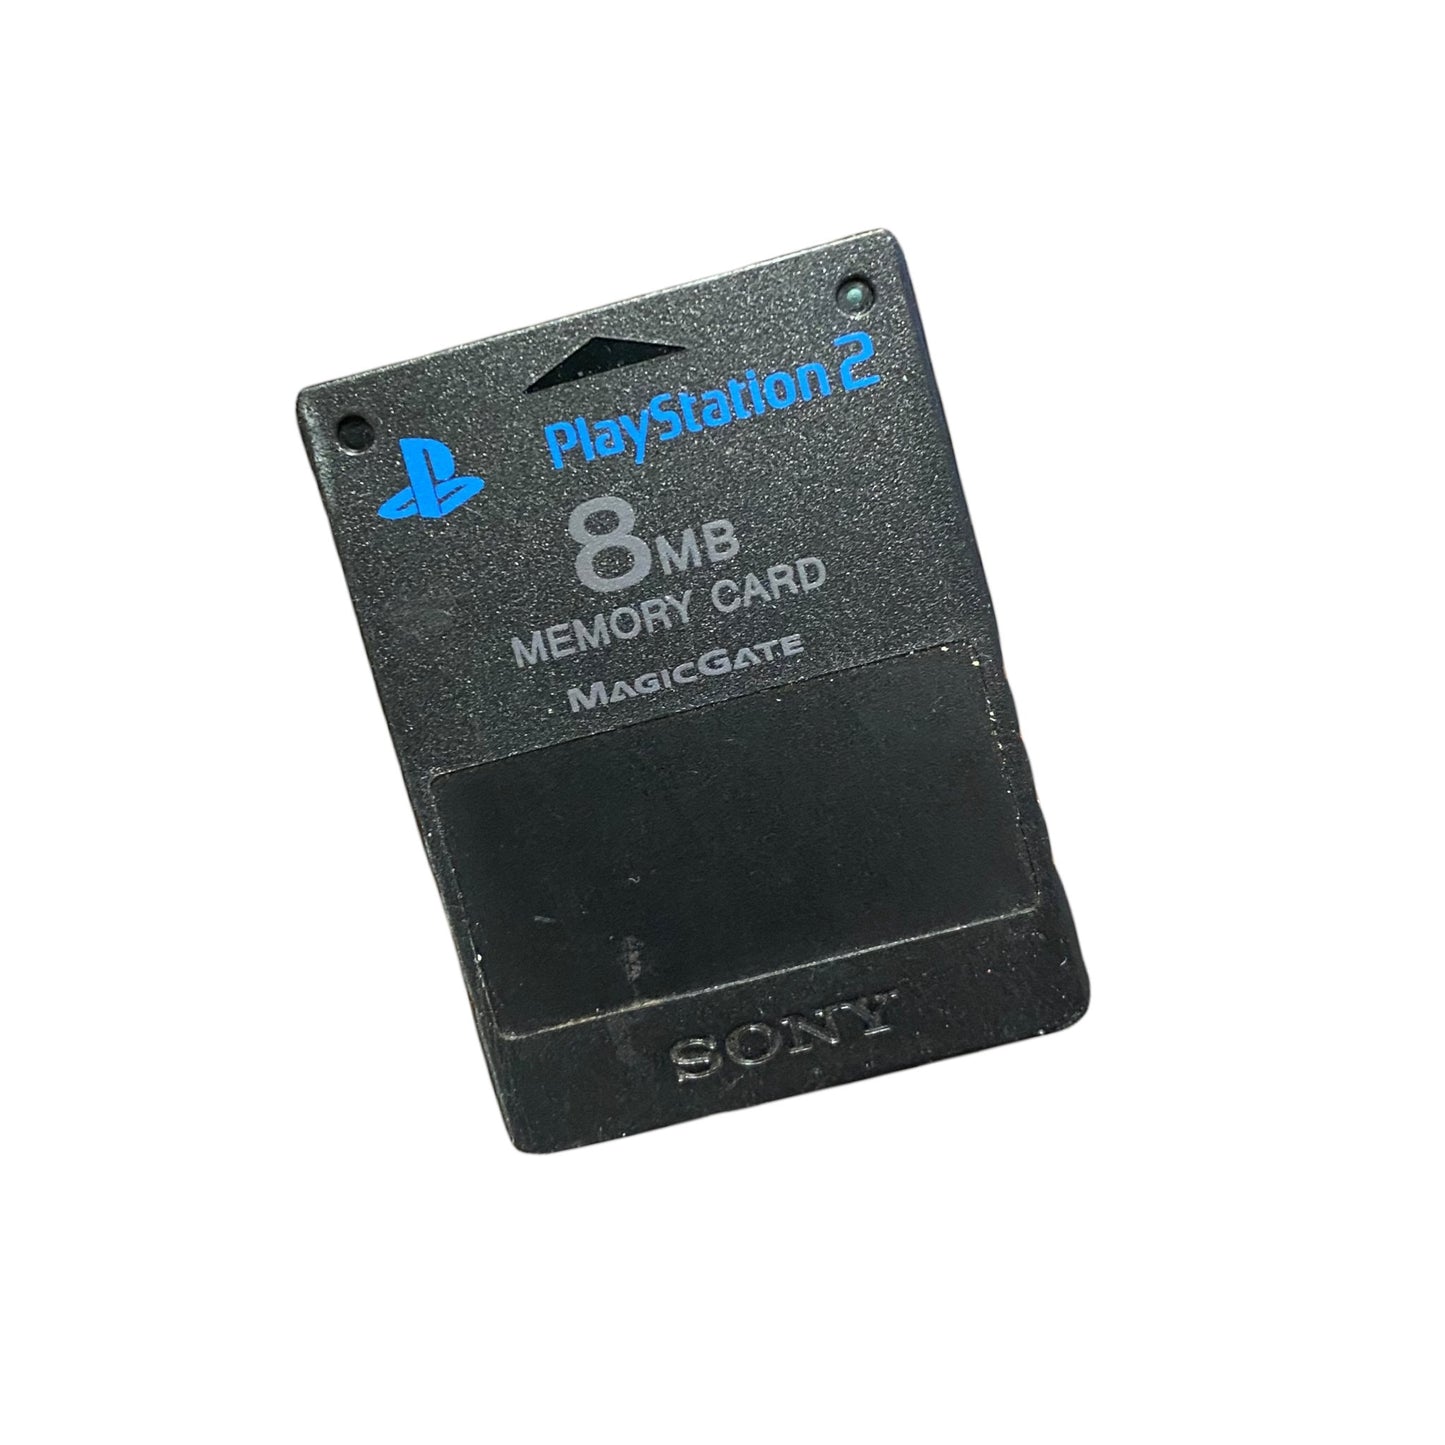 Sony PlayStation 2 PS2 8MB MagicGate Memory Card - Black from 2P Gaming